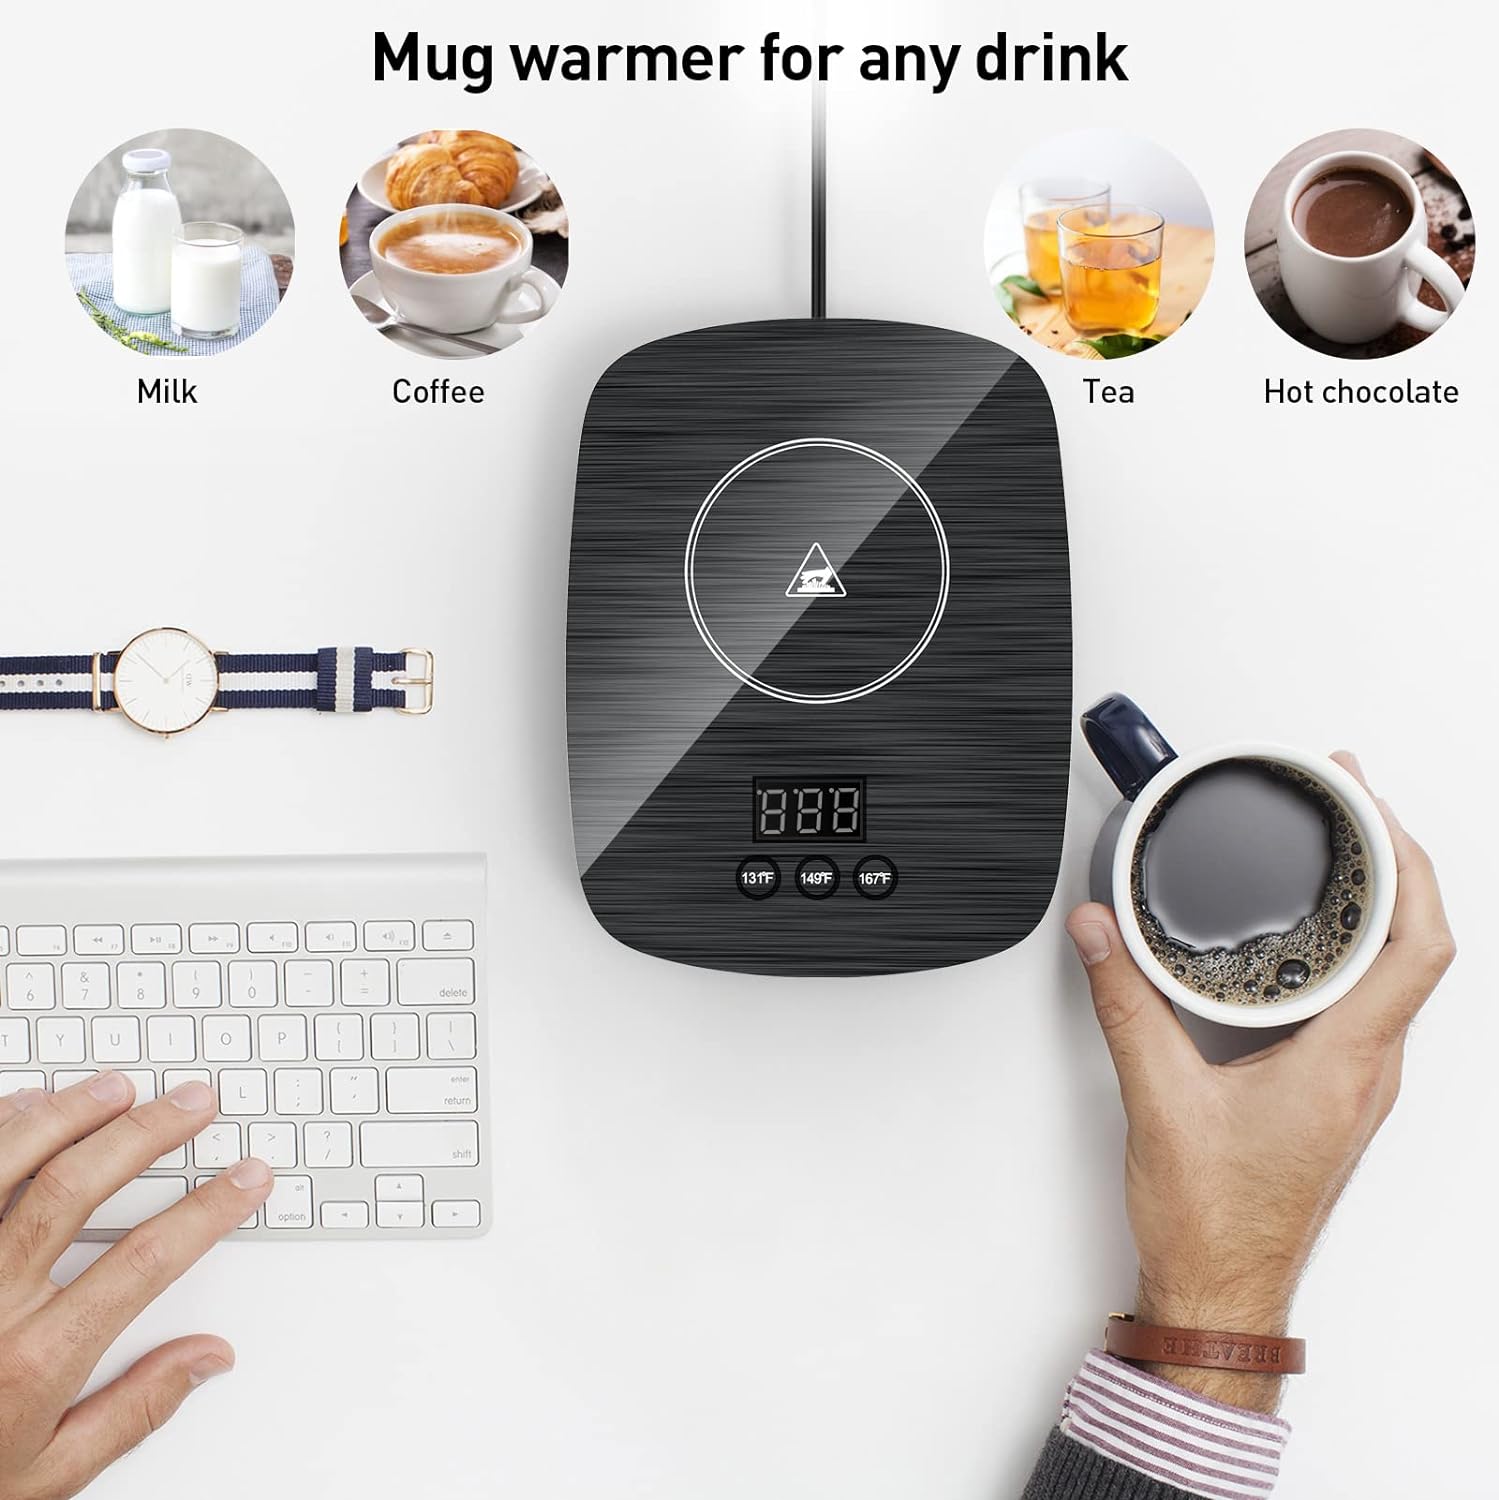 Coffee Mug Warmer for Desk with Heating Function 25 Watt Electric Beverage Warmer with Adjustable Temperature 131℉/ 55℃or 167℉/ 75℃ (Without Mug)